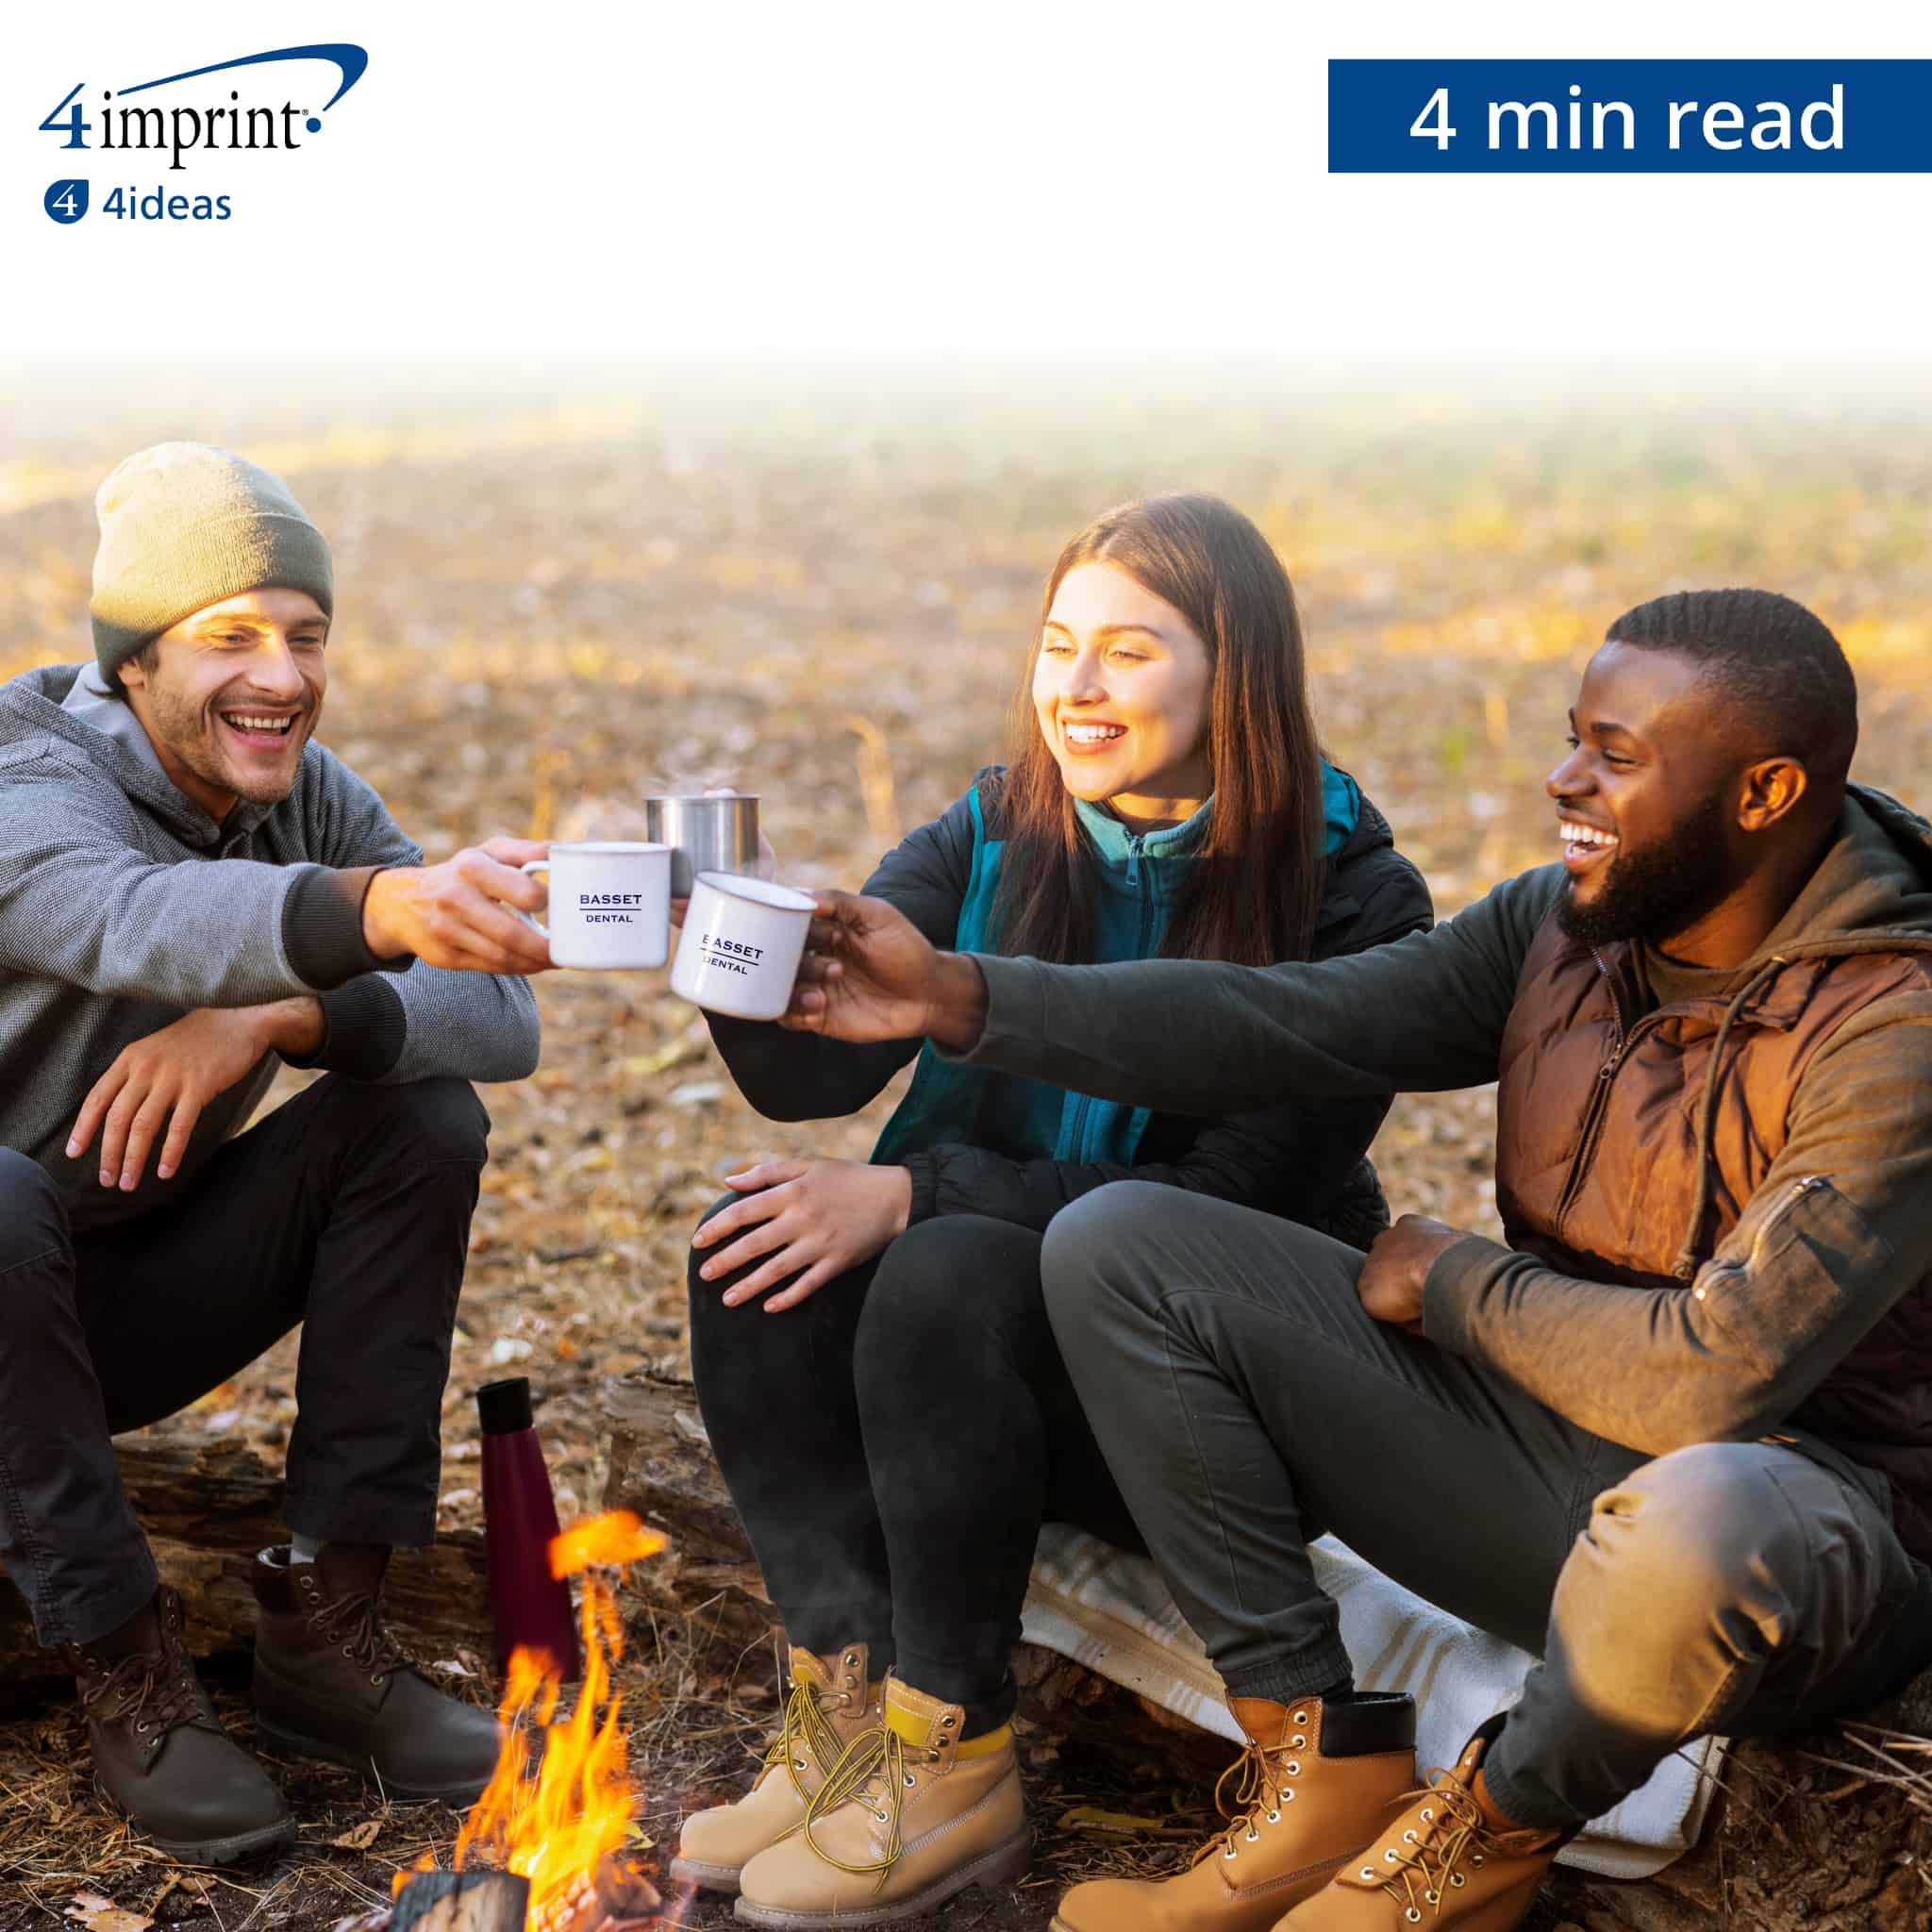 Three people sitting around a campfire clinking their coffee mugs together.